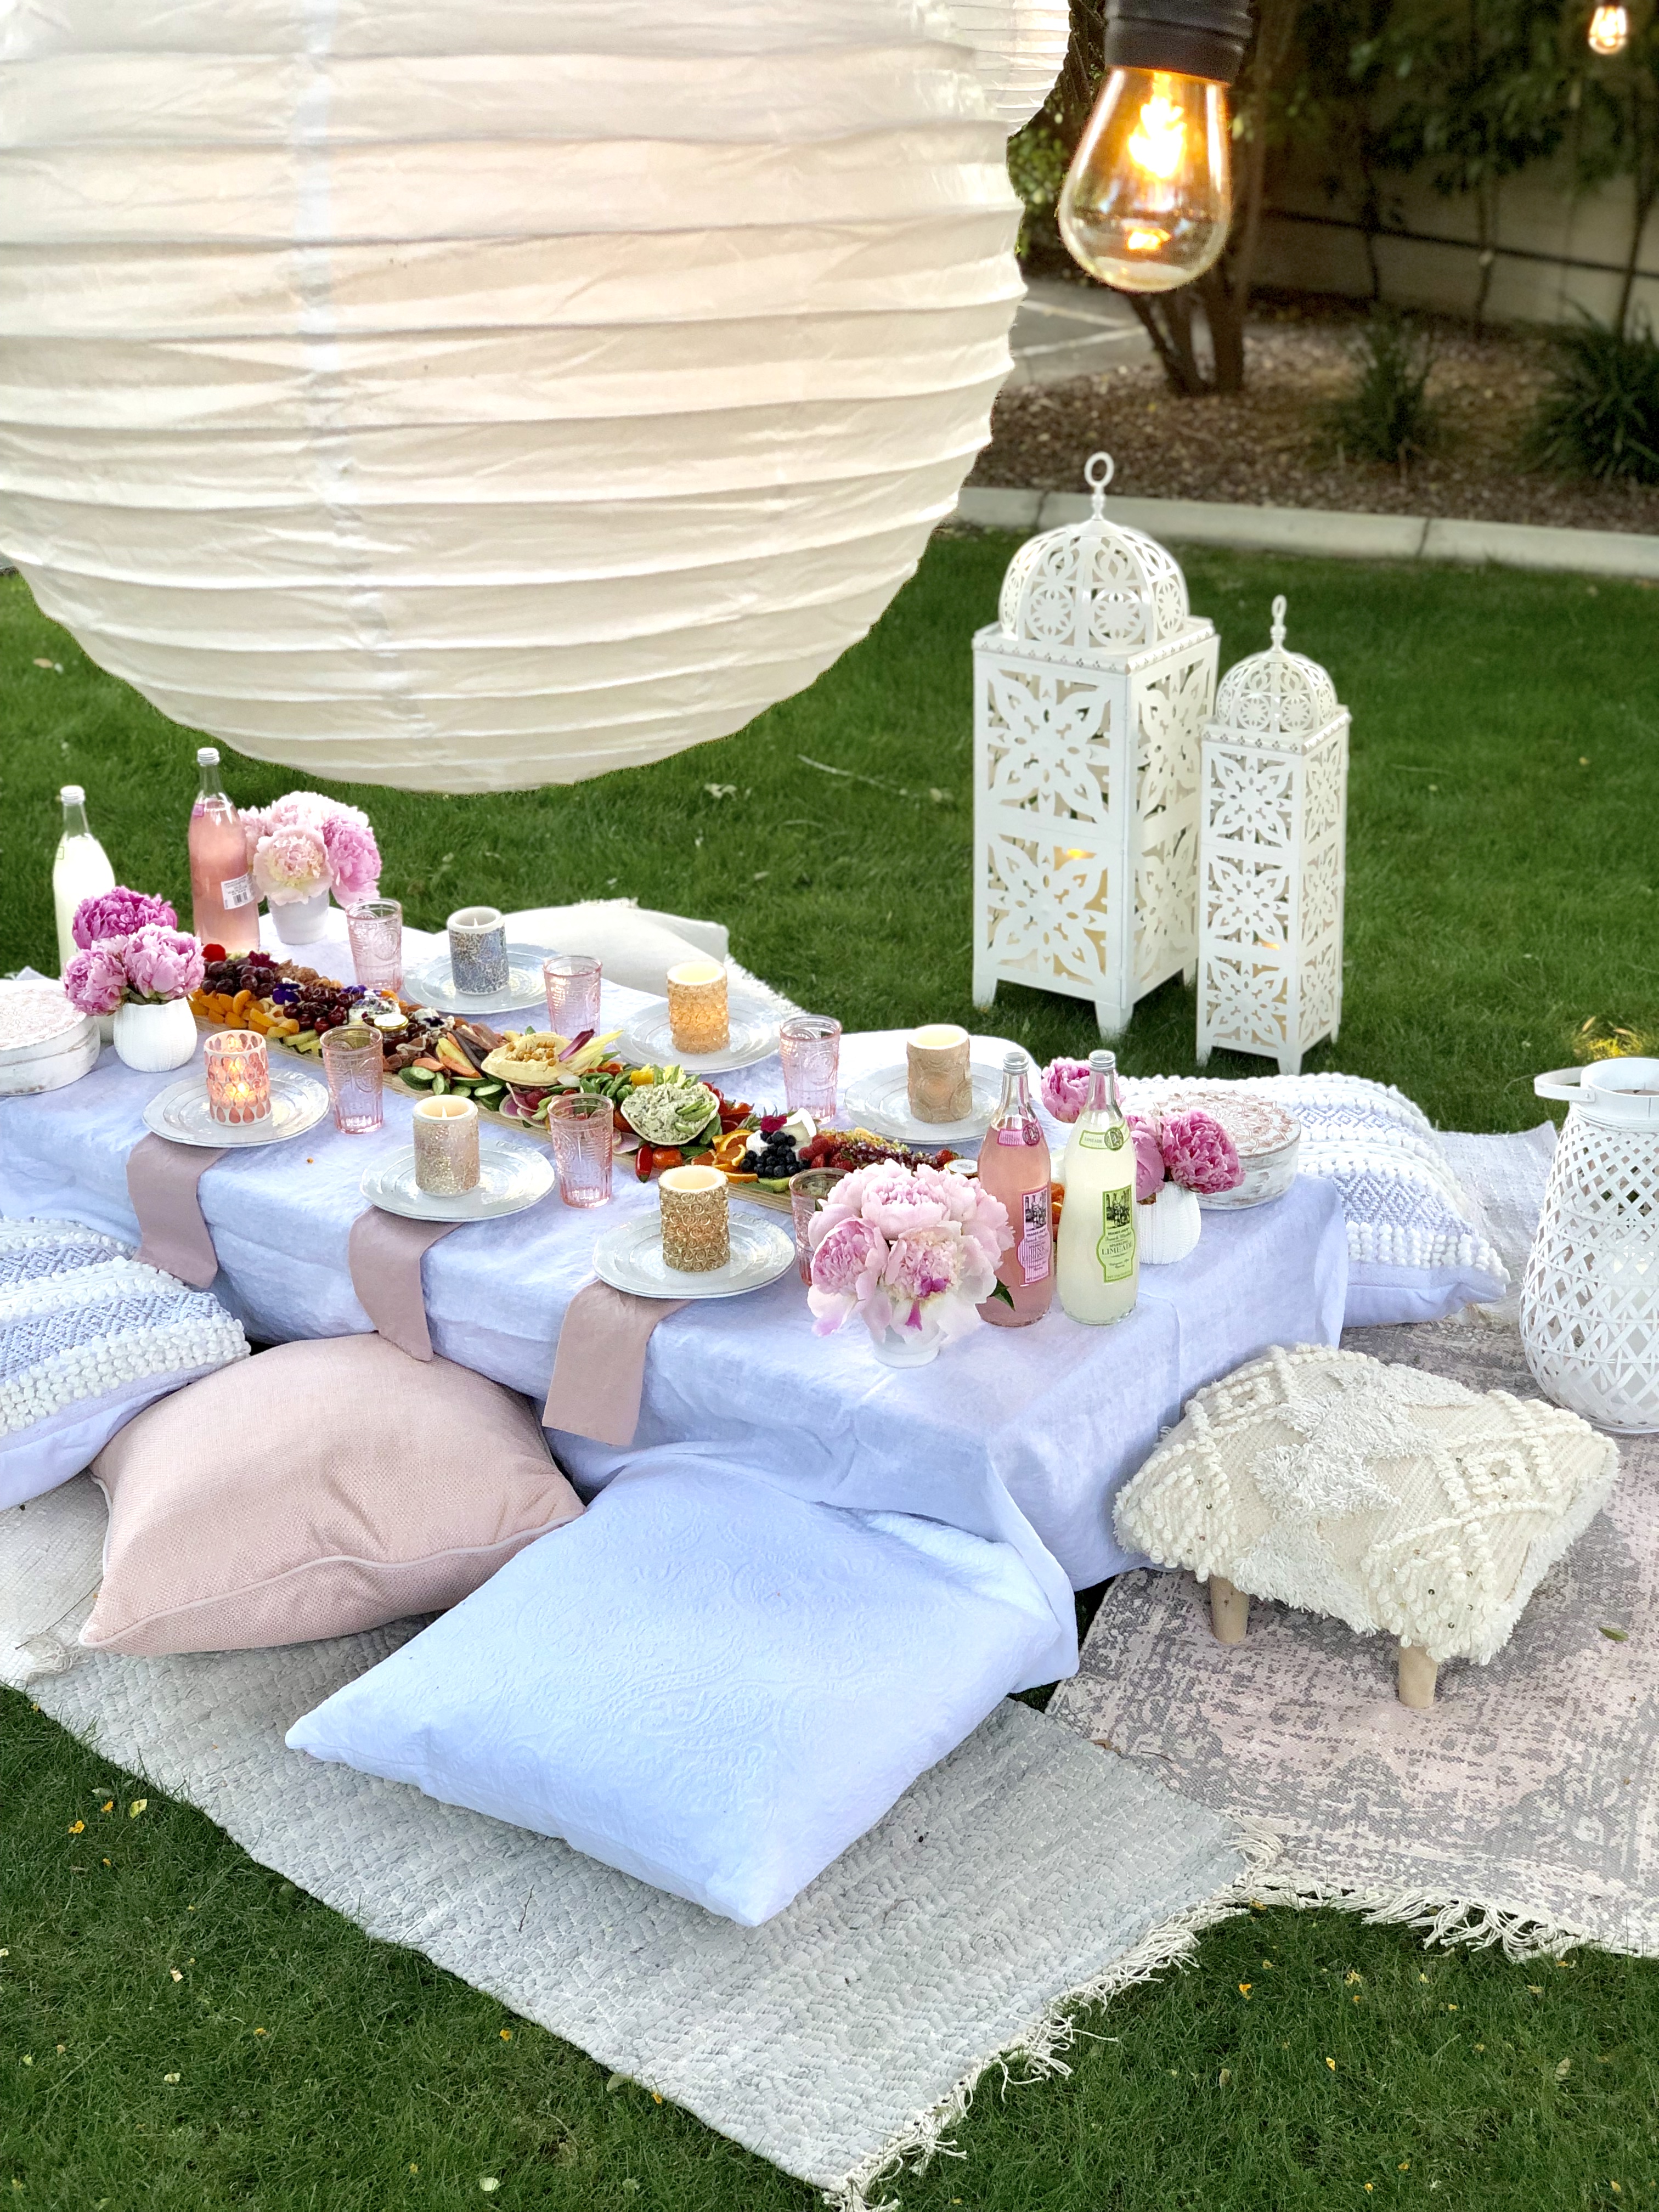 Moroccan Party: Picnic on the Lawn